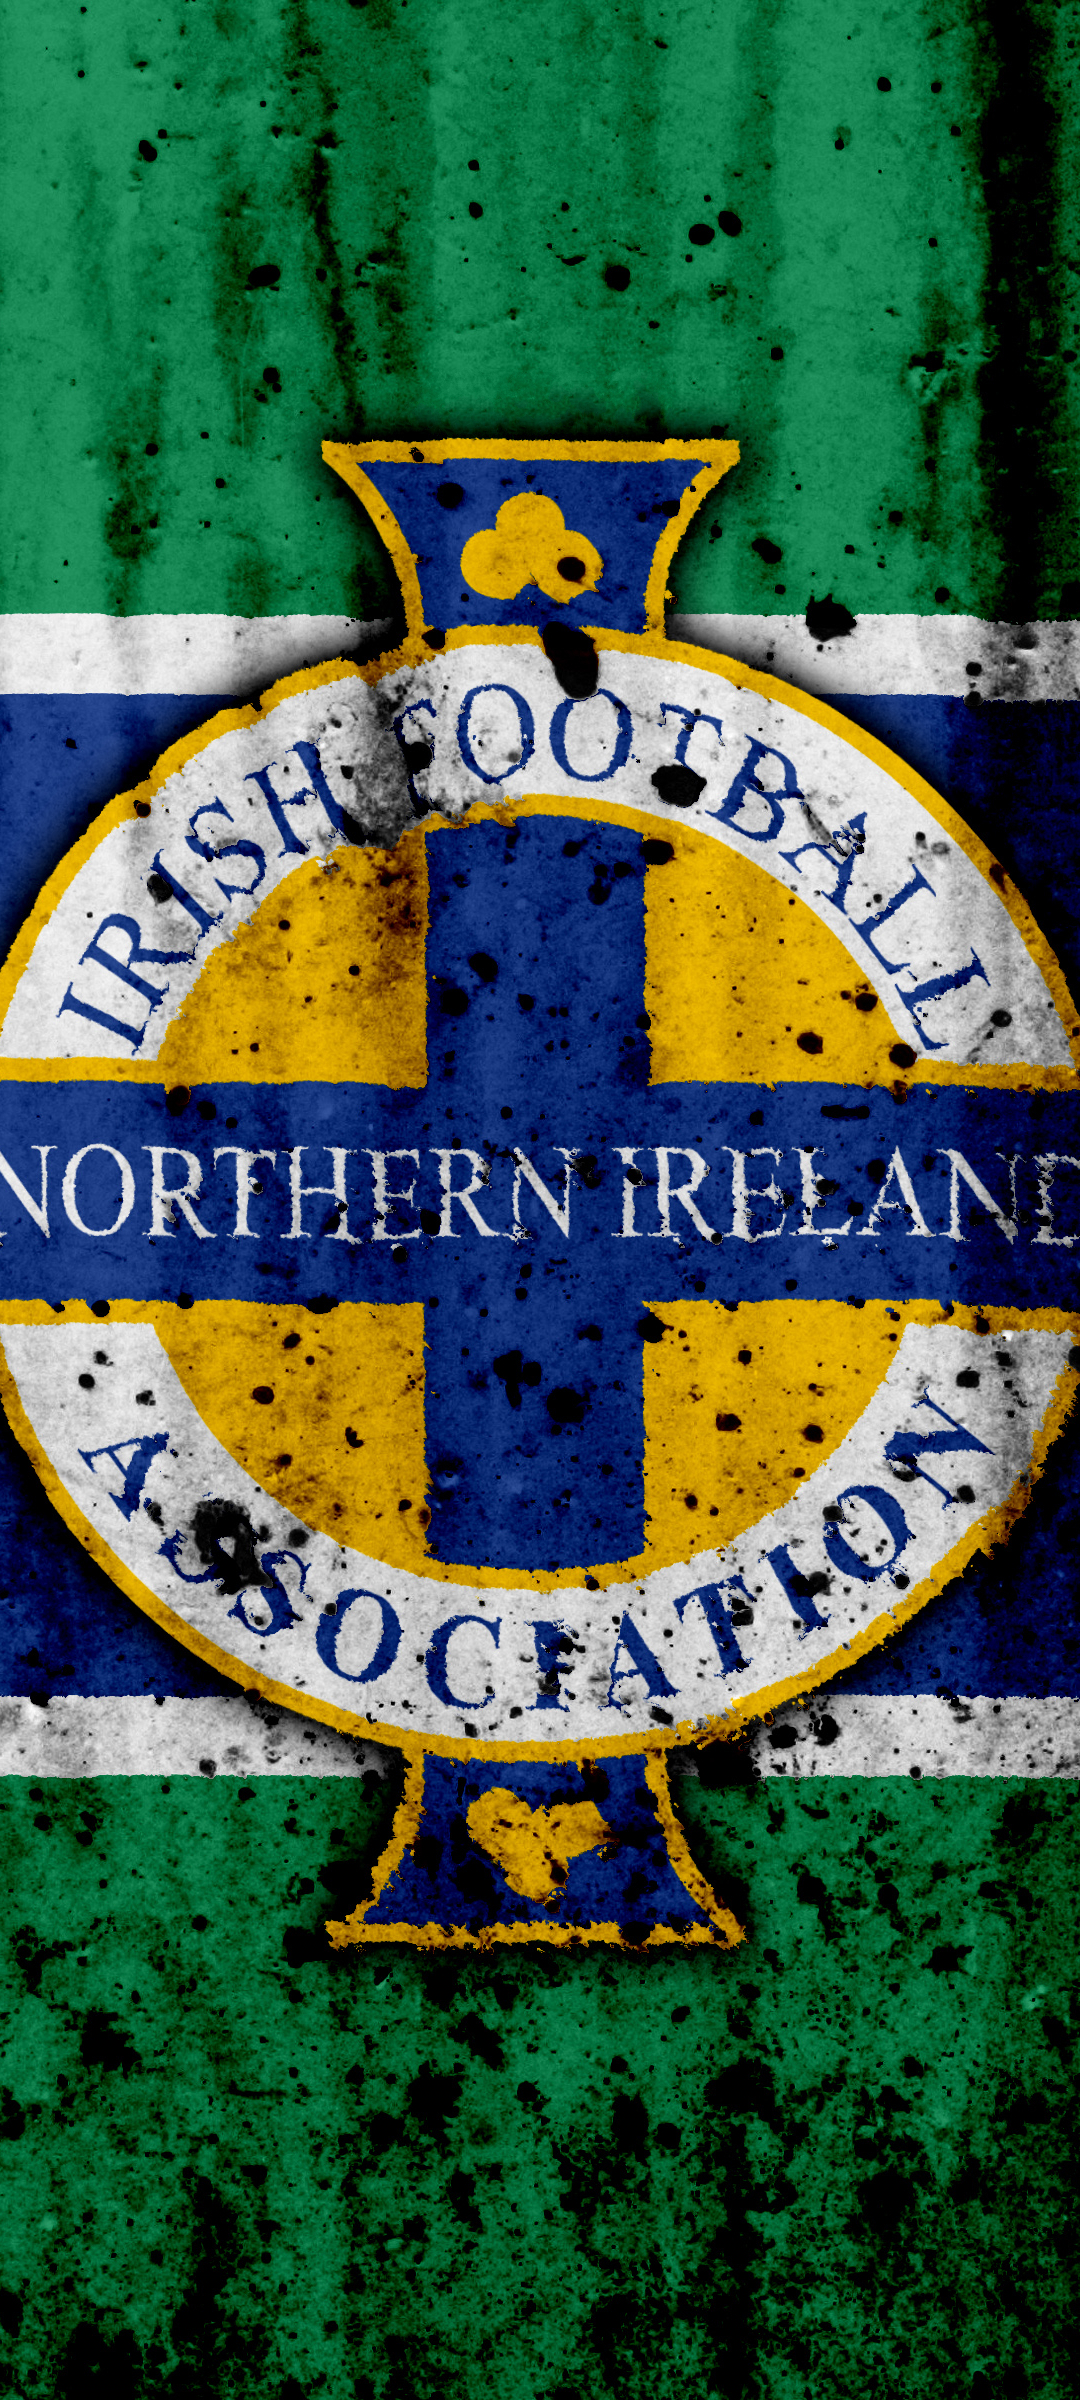 Northern Ireland National Football Team Phone Wallpaper - Mobile Abyss